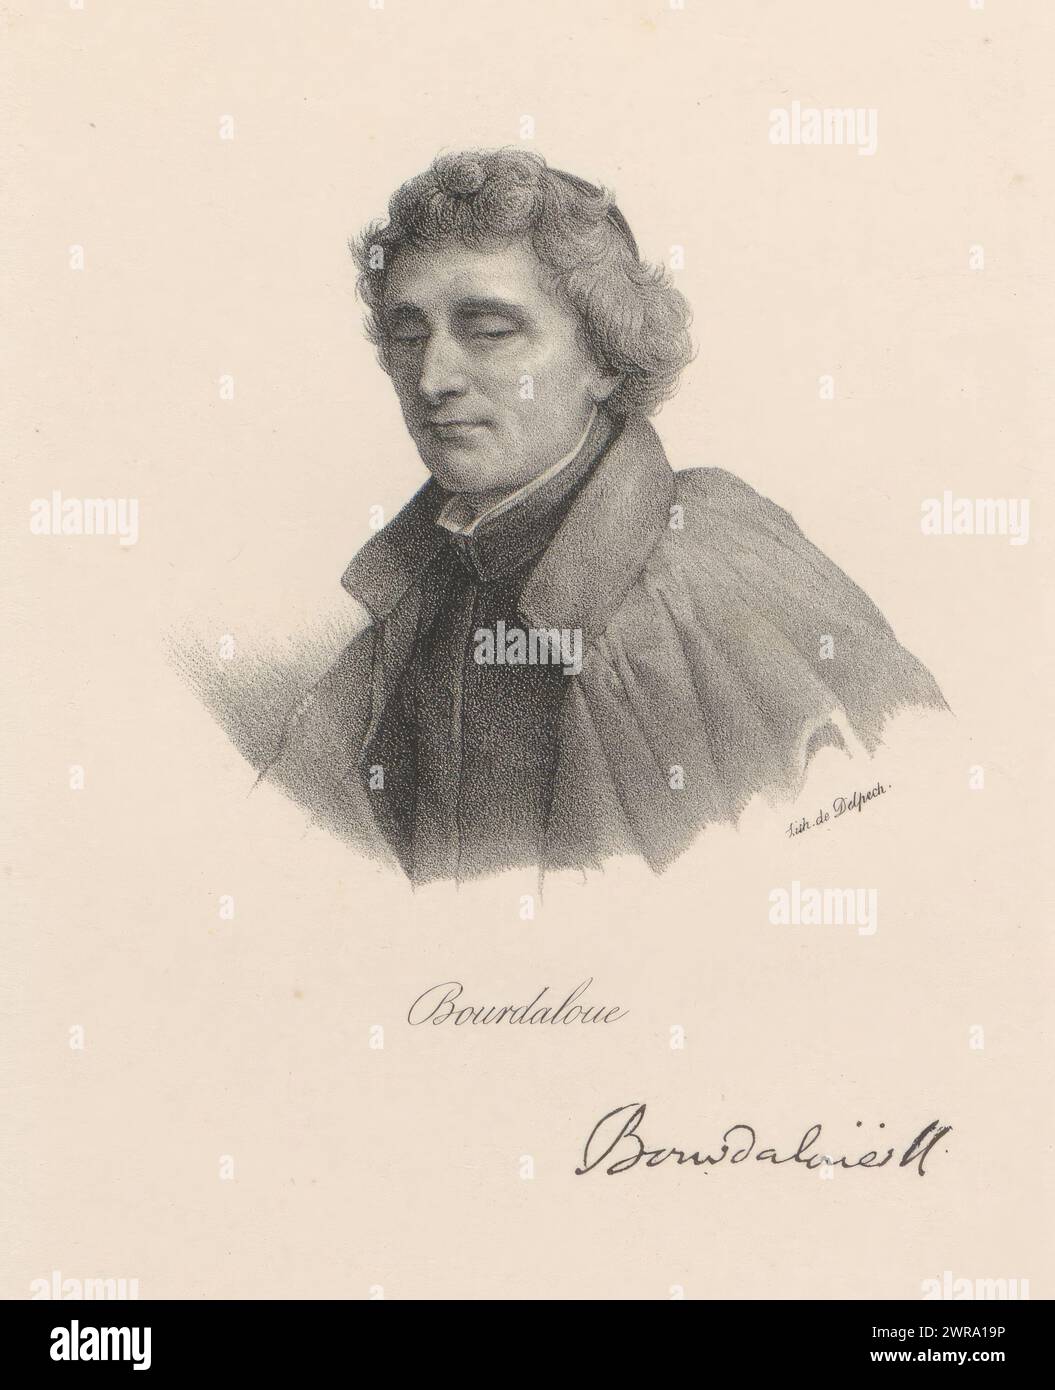 Portrait of Louis Bourdaloue, Bourdaloue (title on object), print maker: anonymous, printer: veuve Delpech (Naudet), Paris, in or after 1818 - in or before 1842, paper, height 271 mm × width 179 mm, print Stock Photo